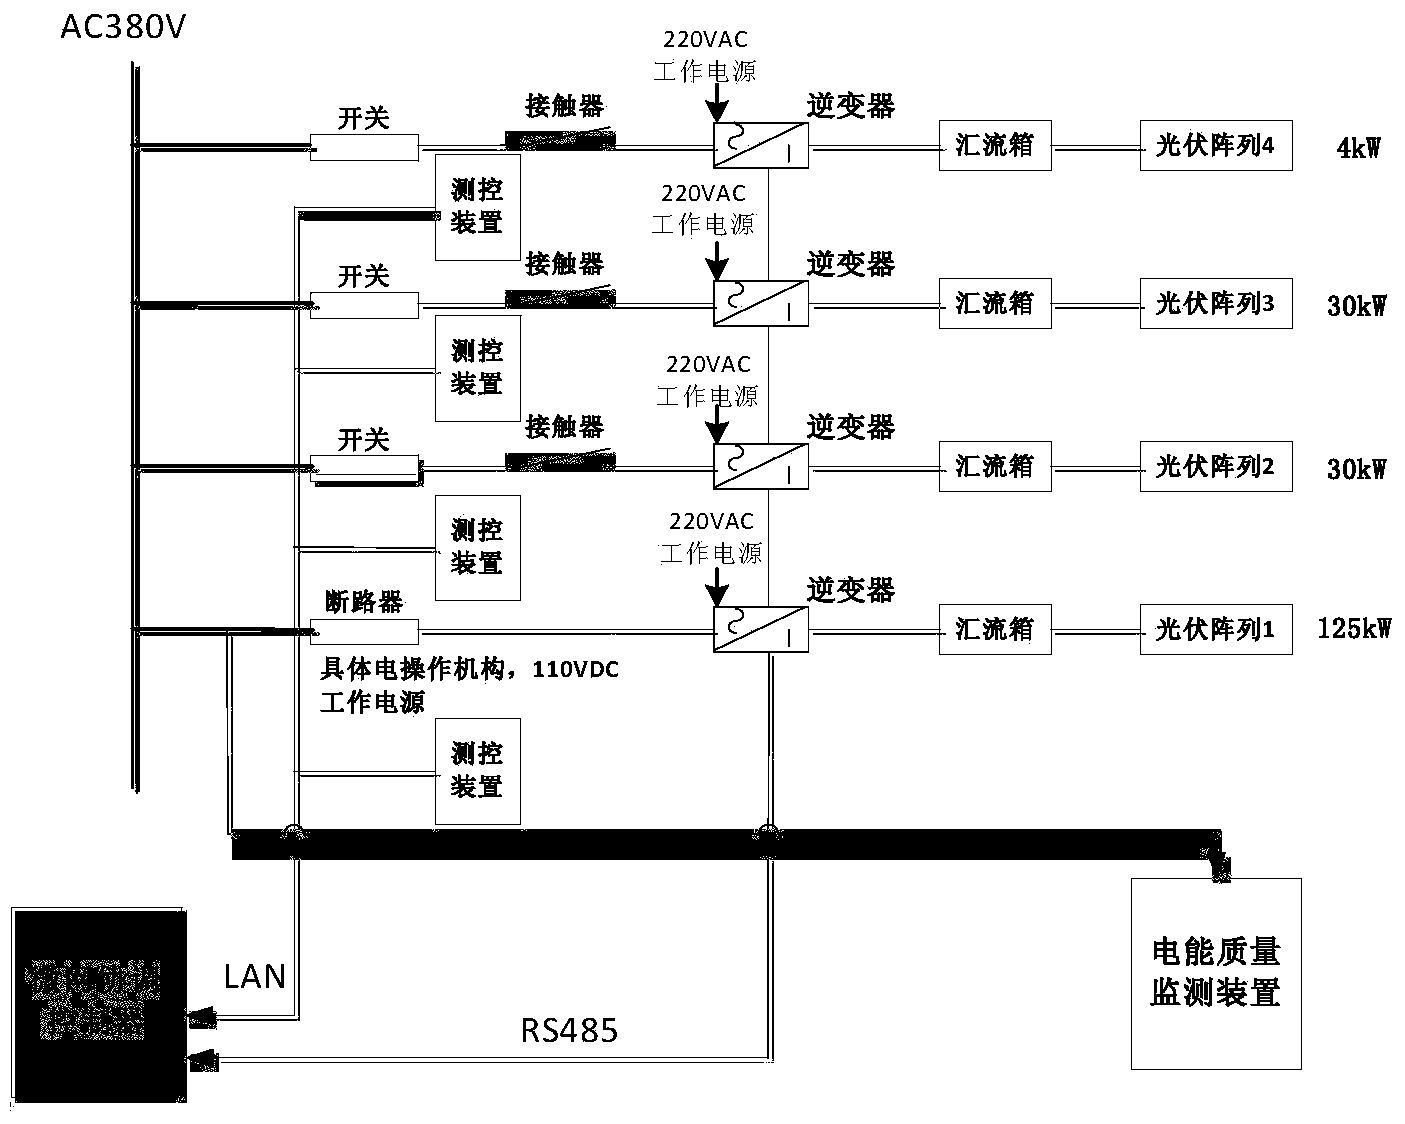 Energy system of micro-grid